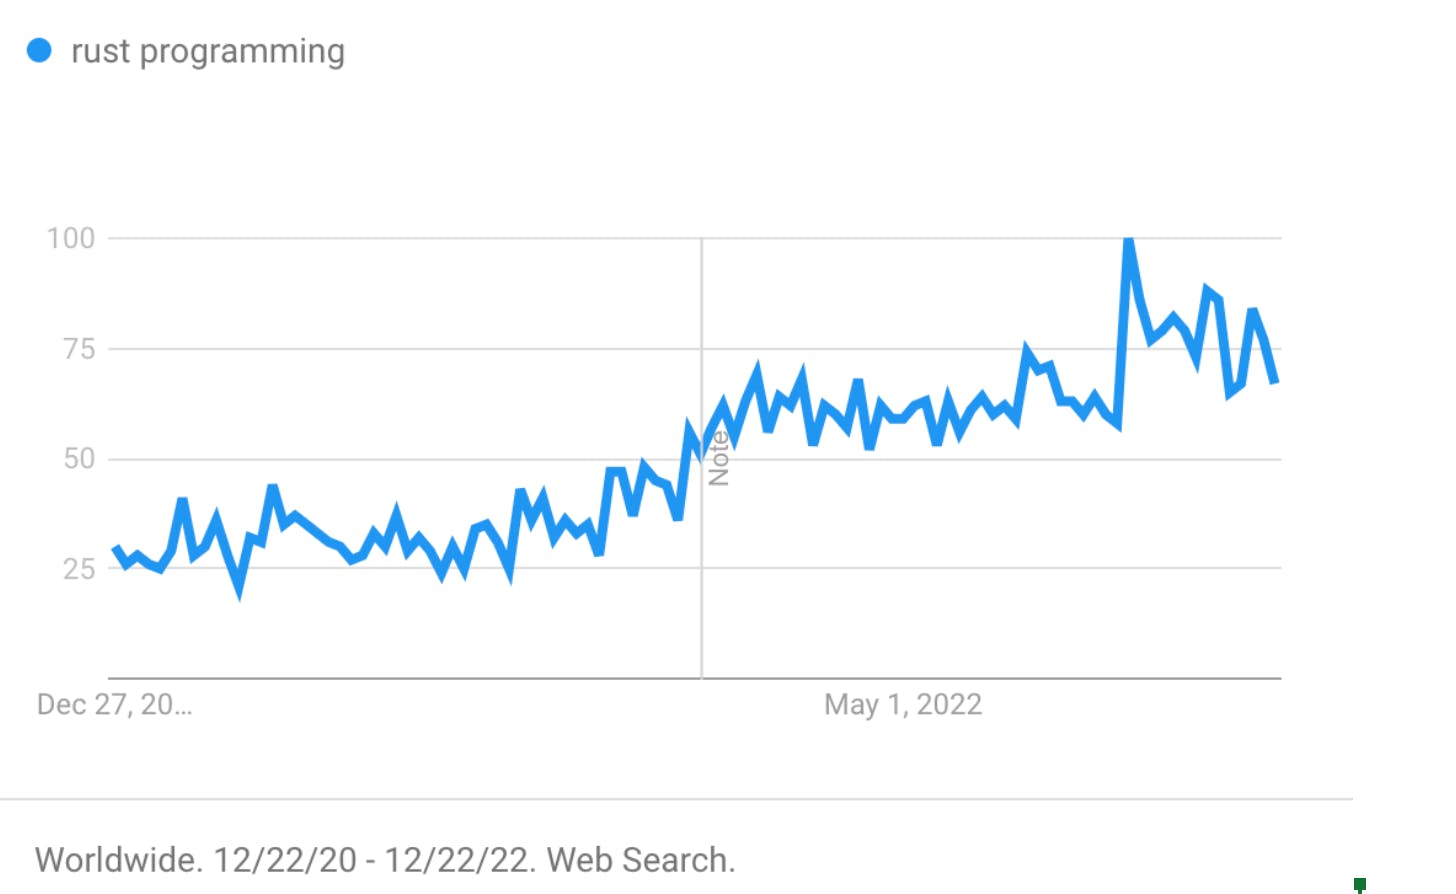 The past 2 years shows a steady incline for Rust programming as a search term on Google. 